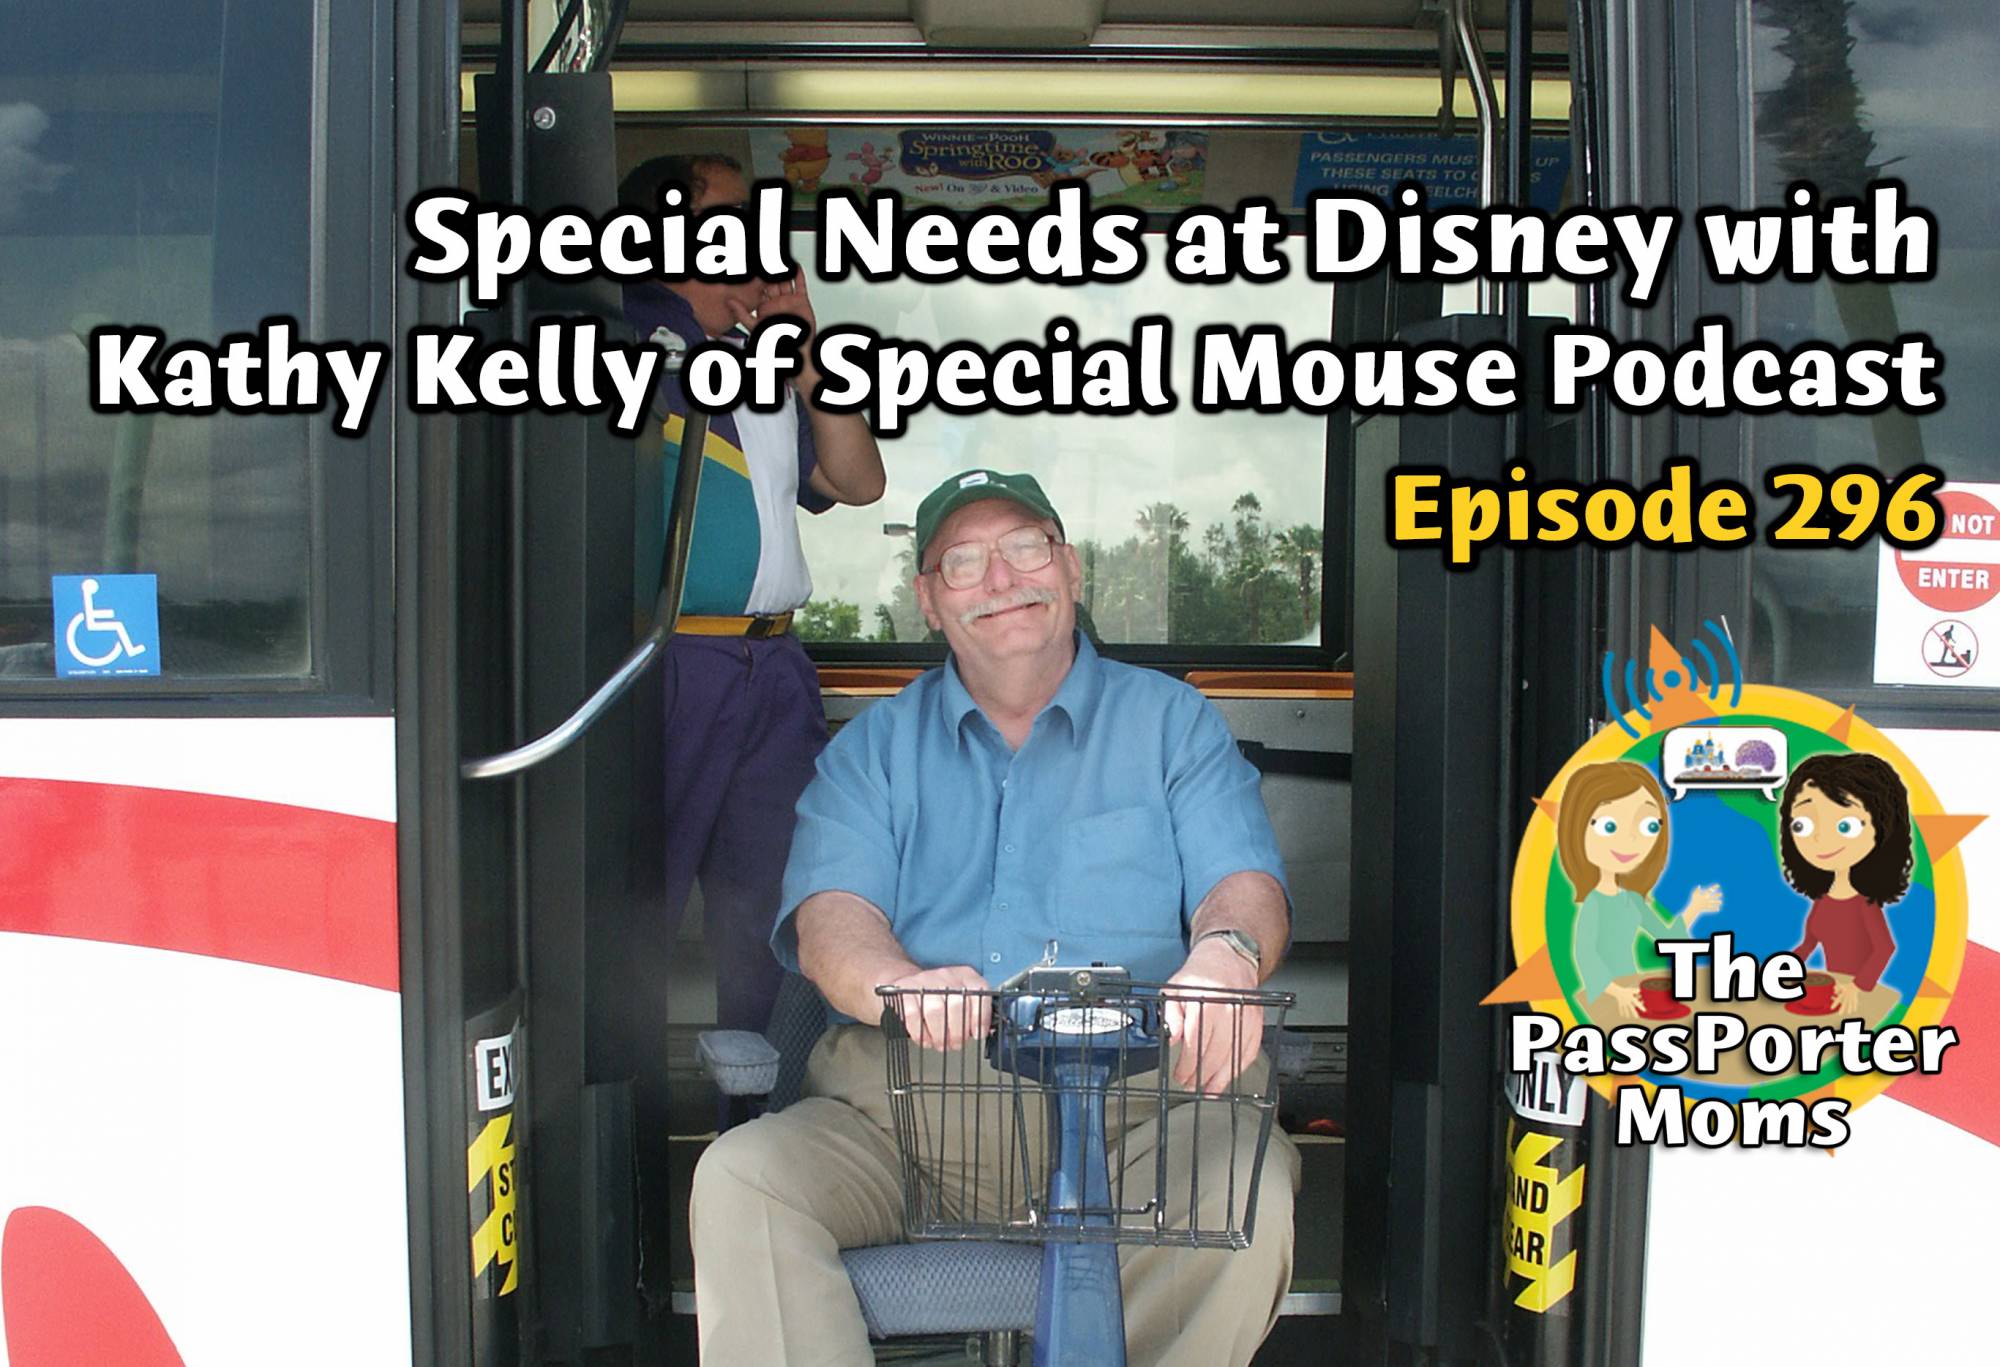 Special Needs at Disney With Kathy Kelly of the Special Mouse Podcast